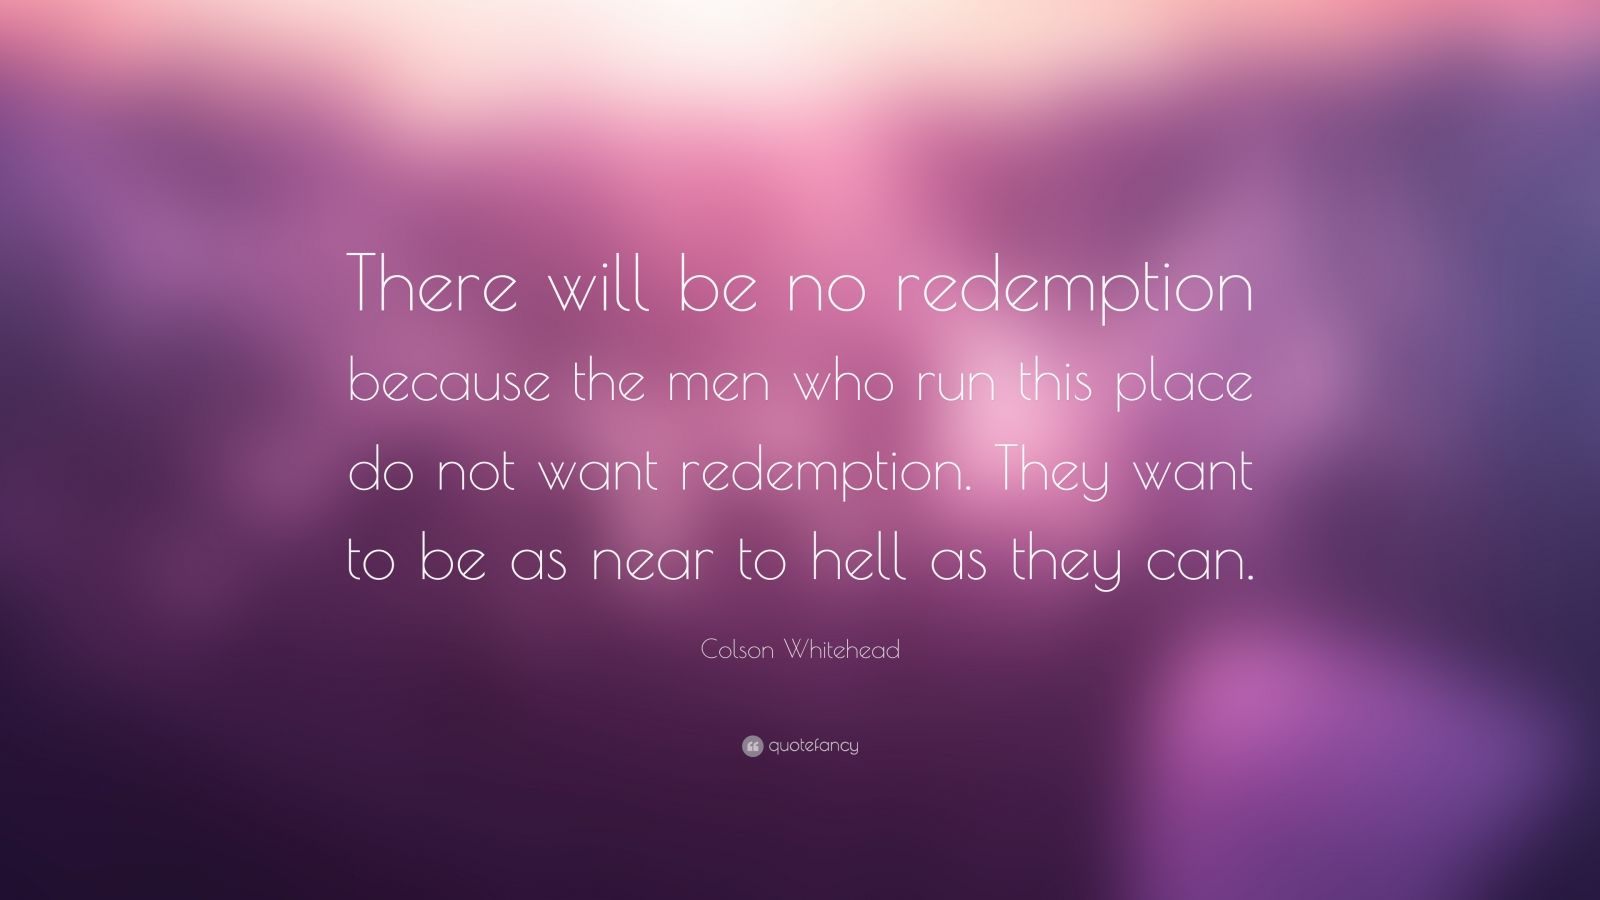 Colson Whitehead Quote “there Will Be No Redemption Because The Men Who Run This Place Do Not